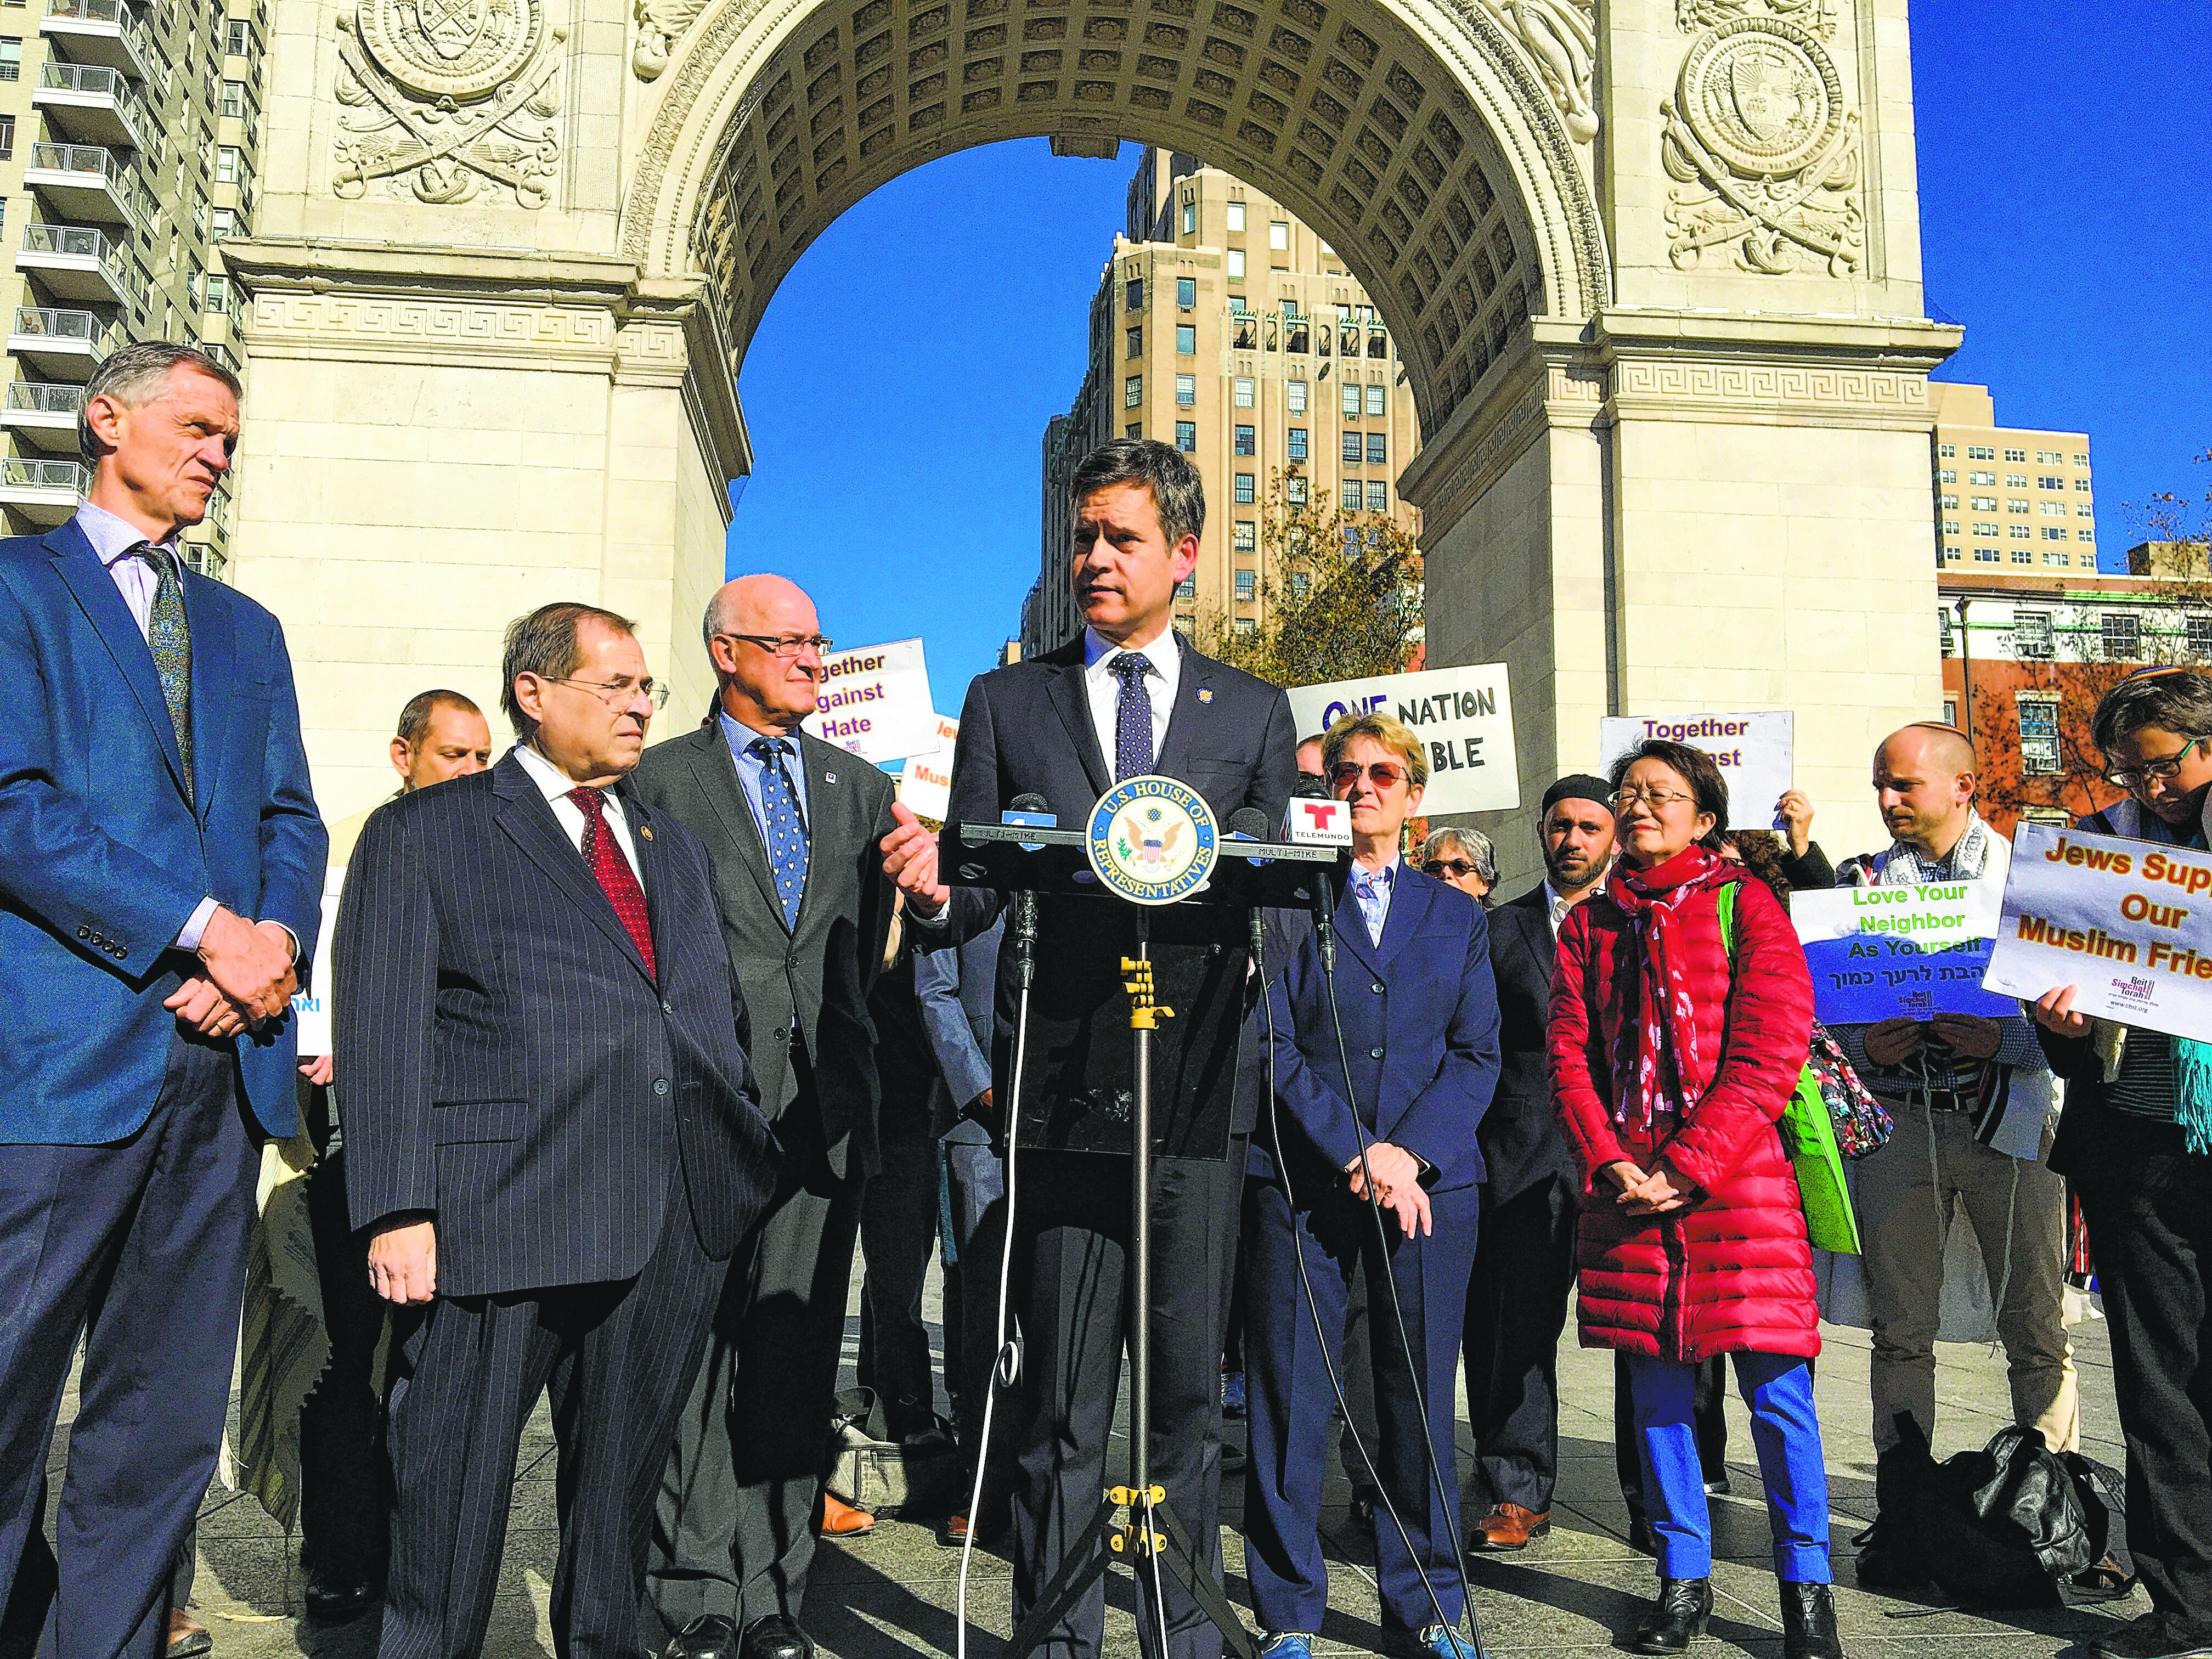 Office of State Sen. Brad Hoylman State Sen. Brad Hoylman, center, led a press conference in Washington Square with fellow local politicians, faith leaders and university presidents on Nov. 17 to decry the recent spate of hateful graffiti and messages around the West Village and on two of its university campuses. Hoylman and his family have been viciously targeted on Twitter by right-wingers, an elevator in his building was defaced with swastikas (below) and, three days after the this press conference, he received a packet of anti-Semitic hate mail.